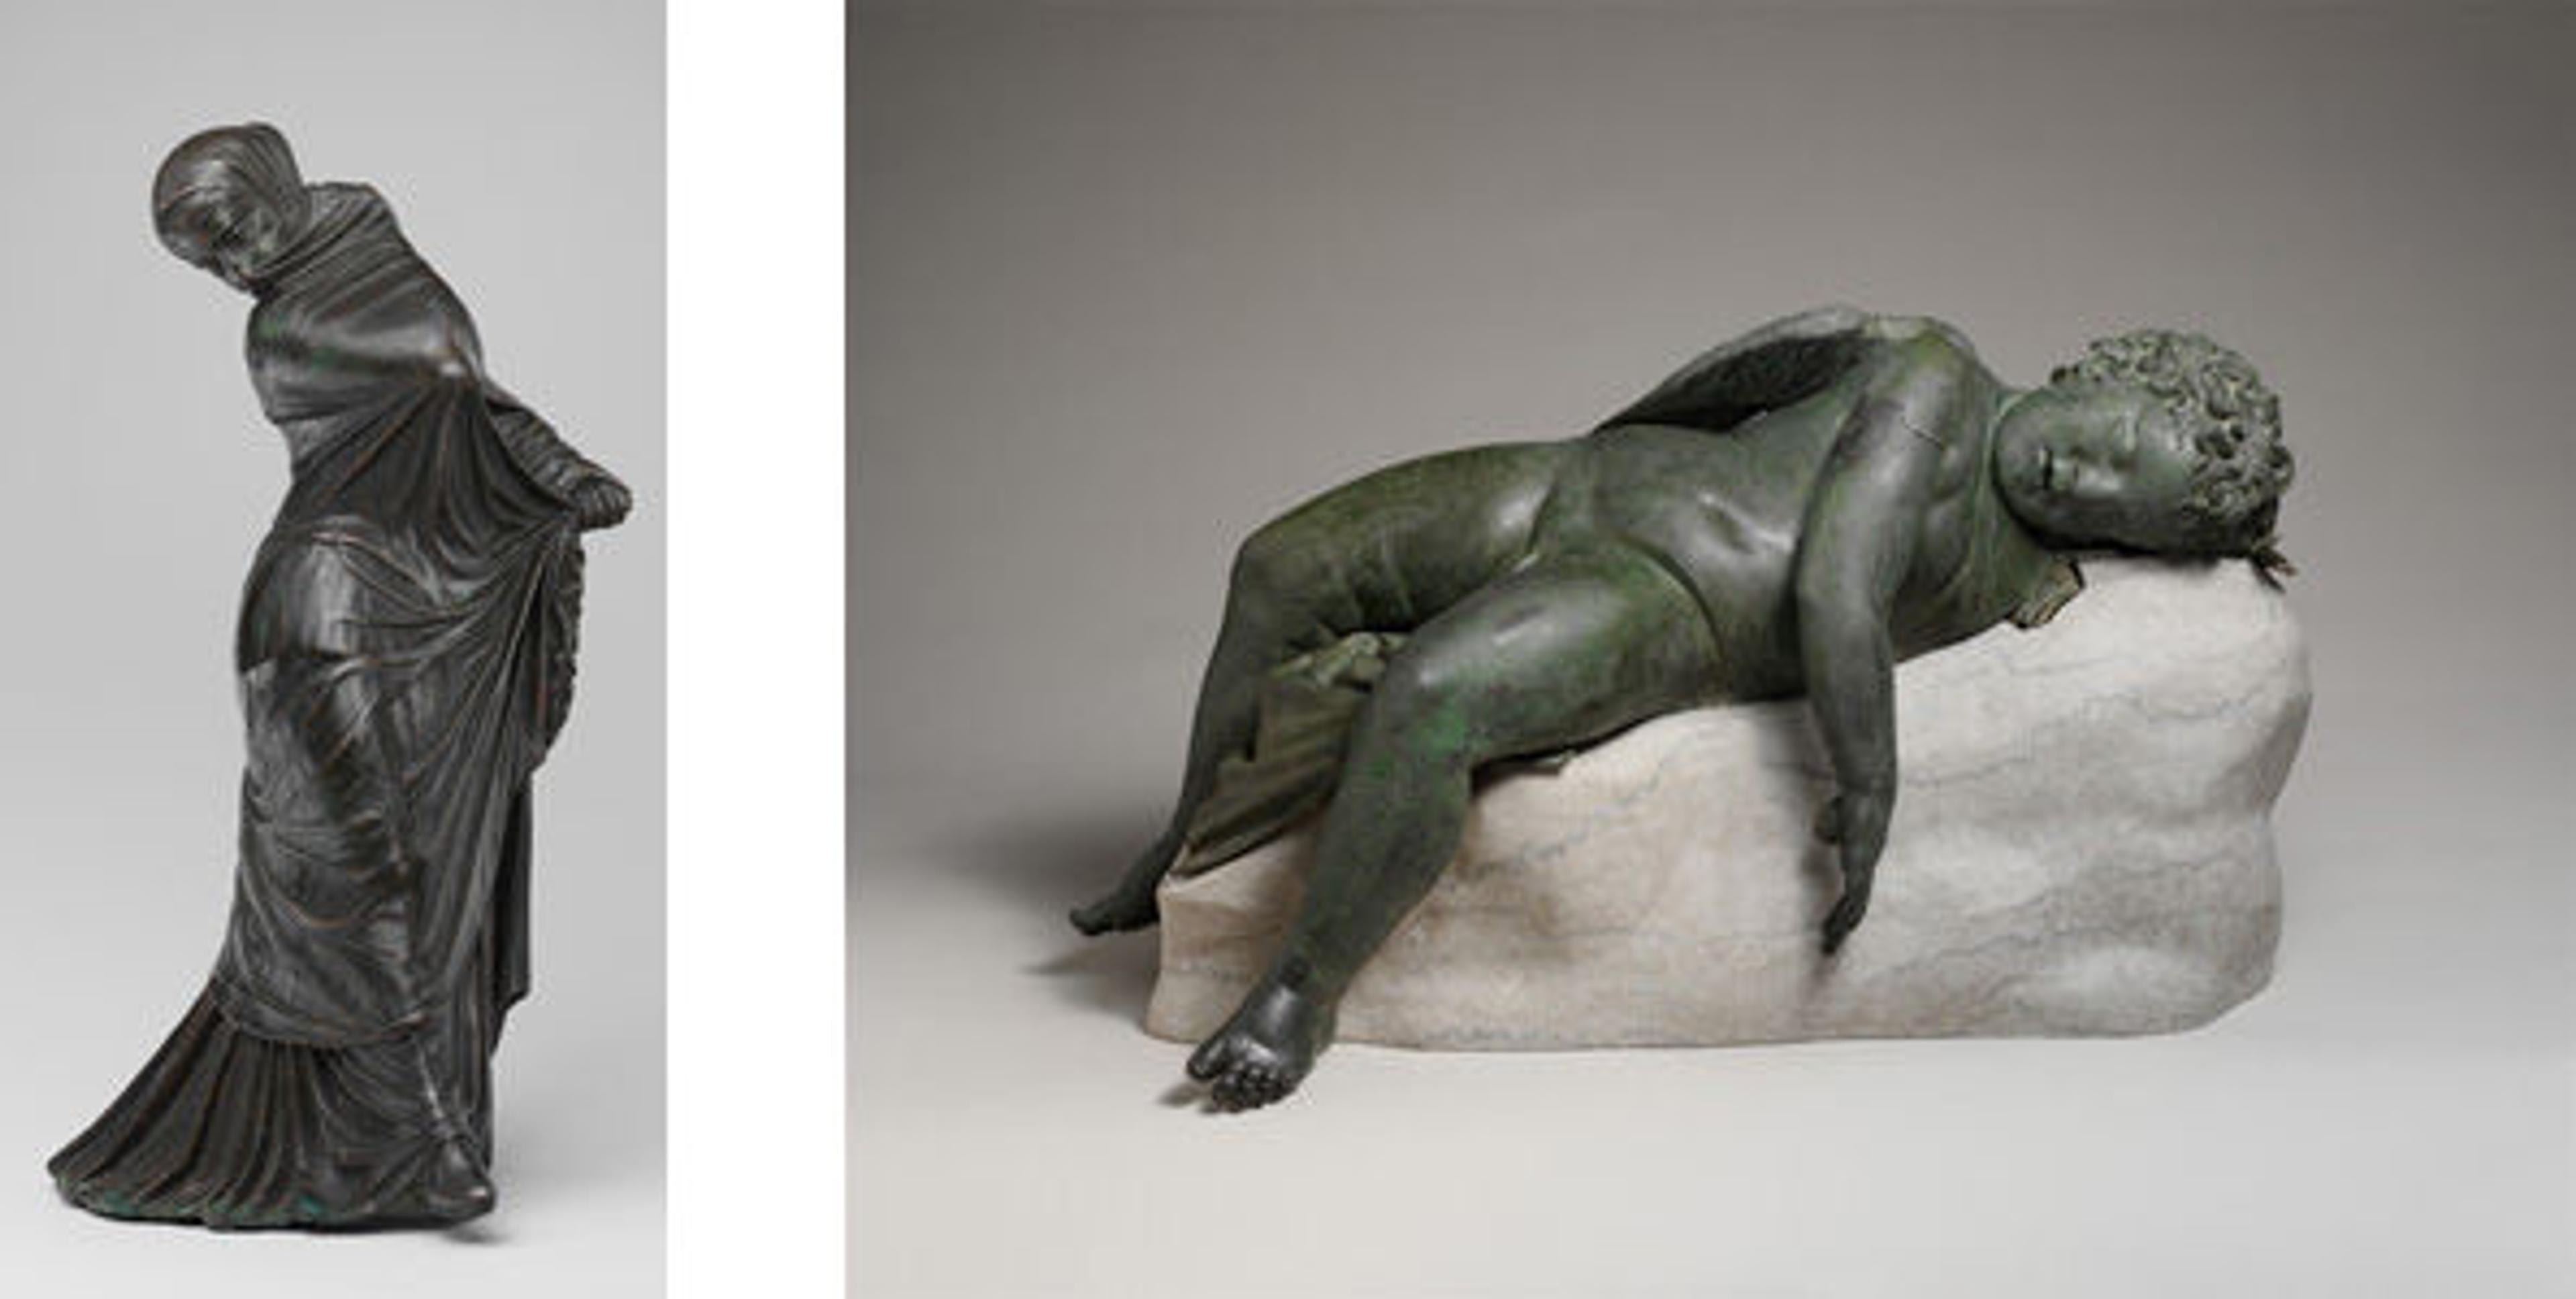 Left: Statuette of a Veiled and Masked Dancer, Greek; Right: Statue of Eros Sleeping, Greek